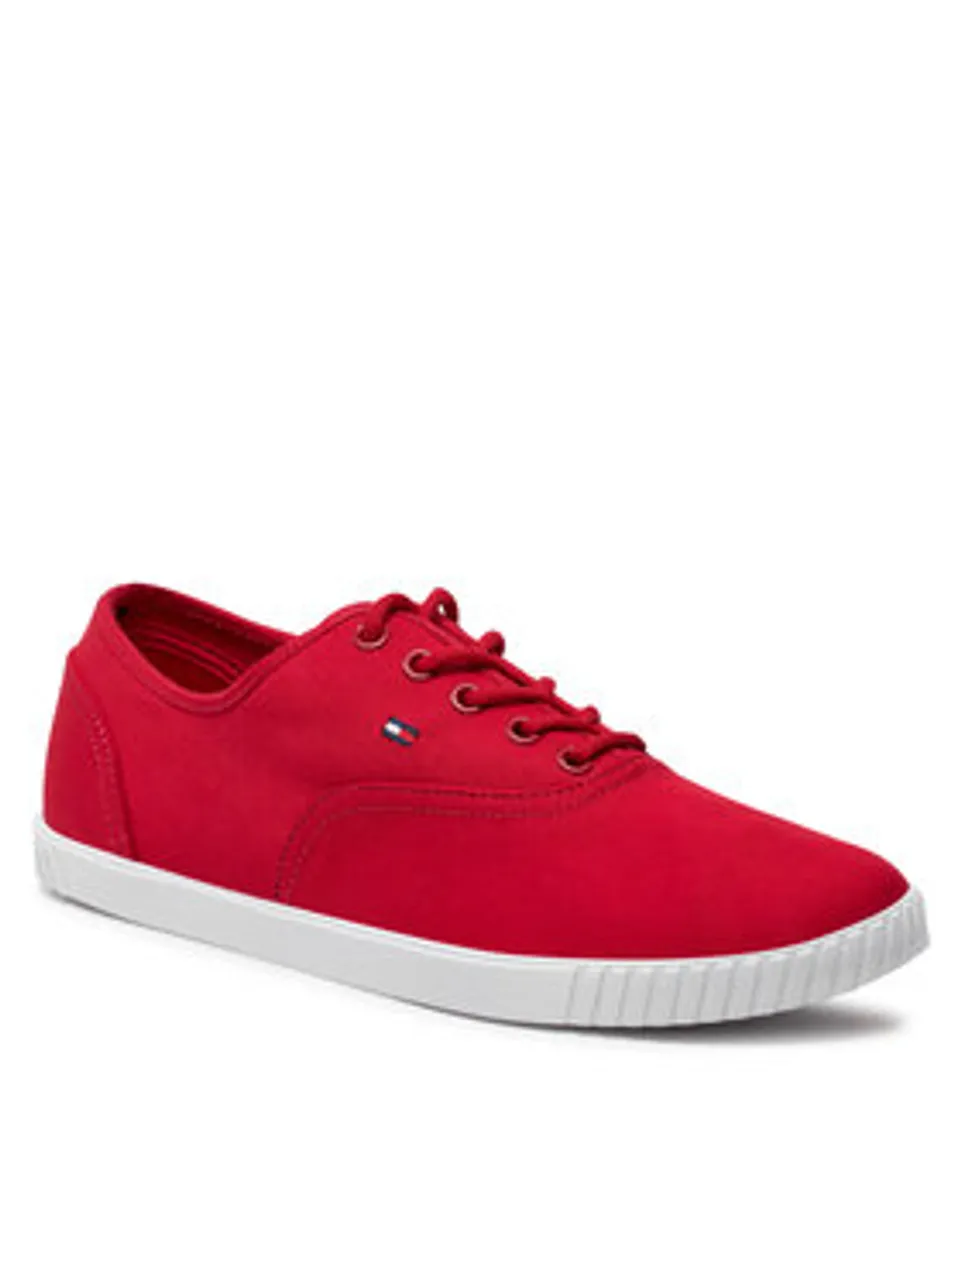 Tommy Hilfiger Sneakers aus Stoff Canvas Lace Up Sneaker FW0FW07805 Rot